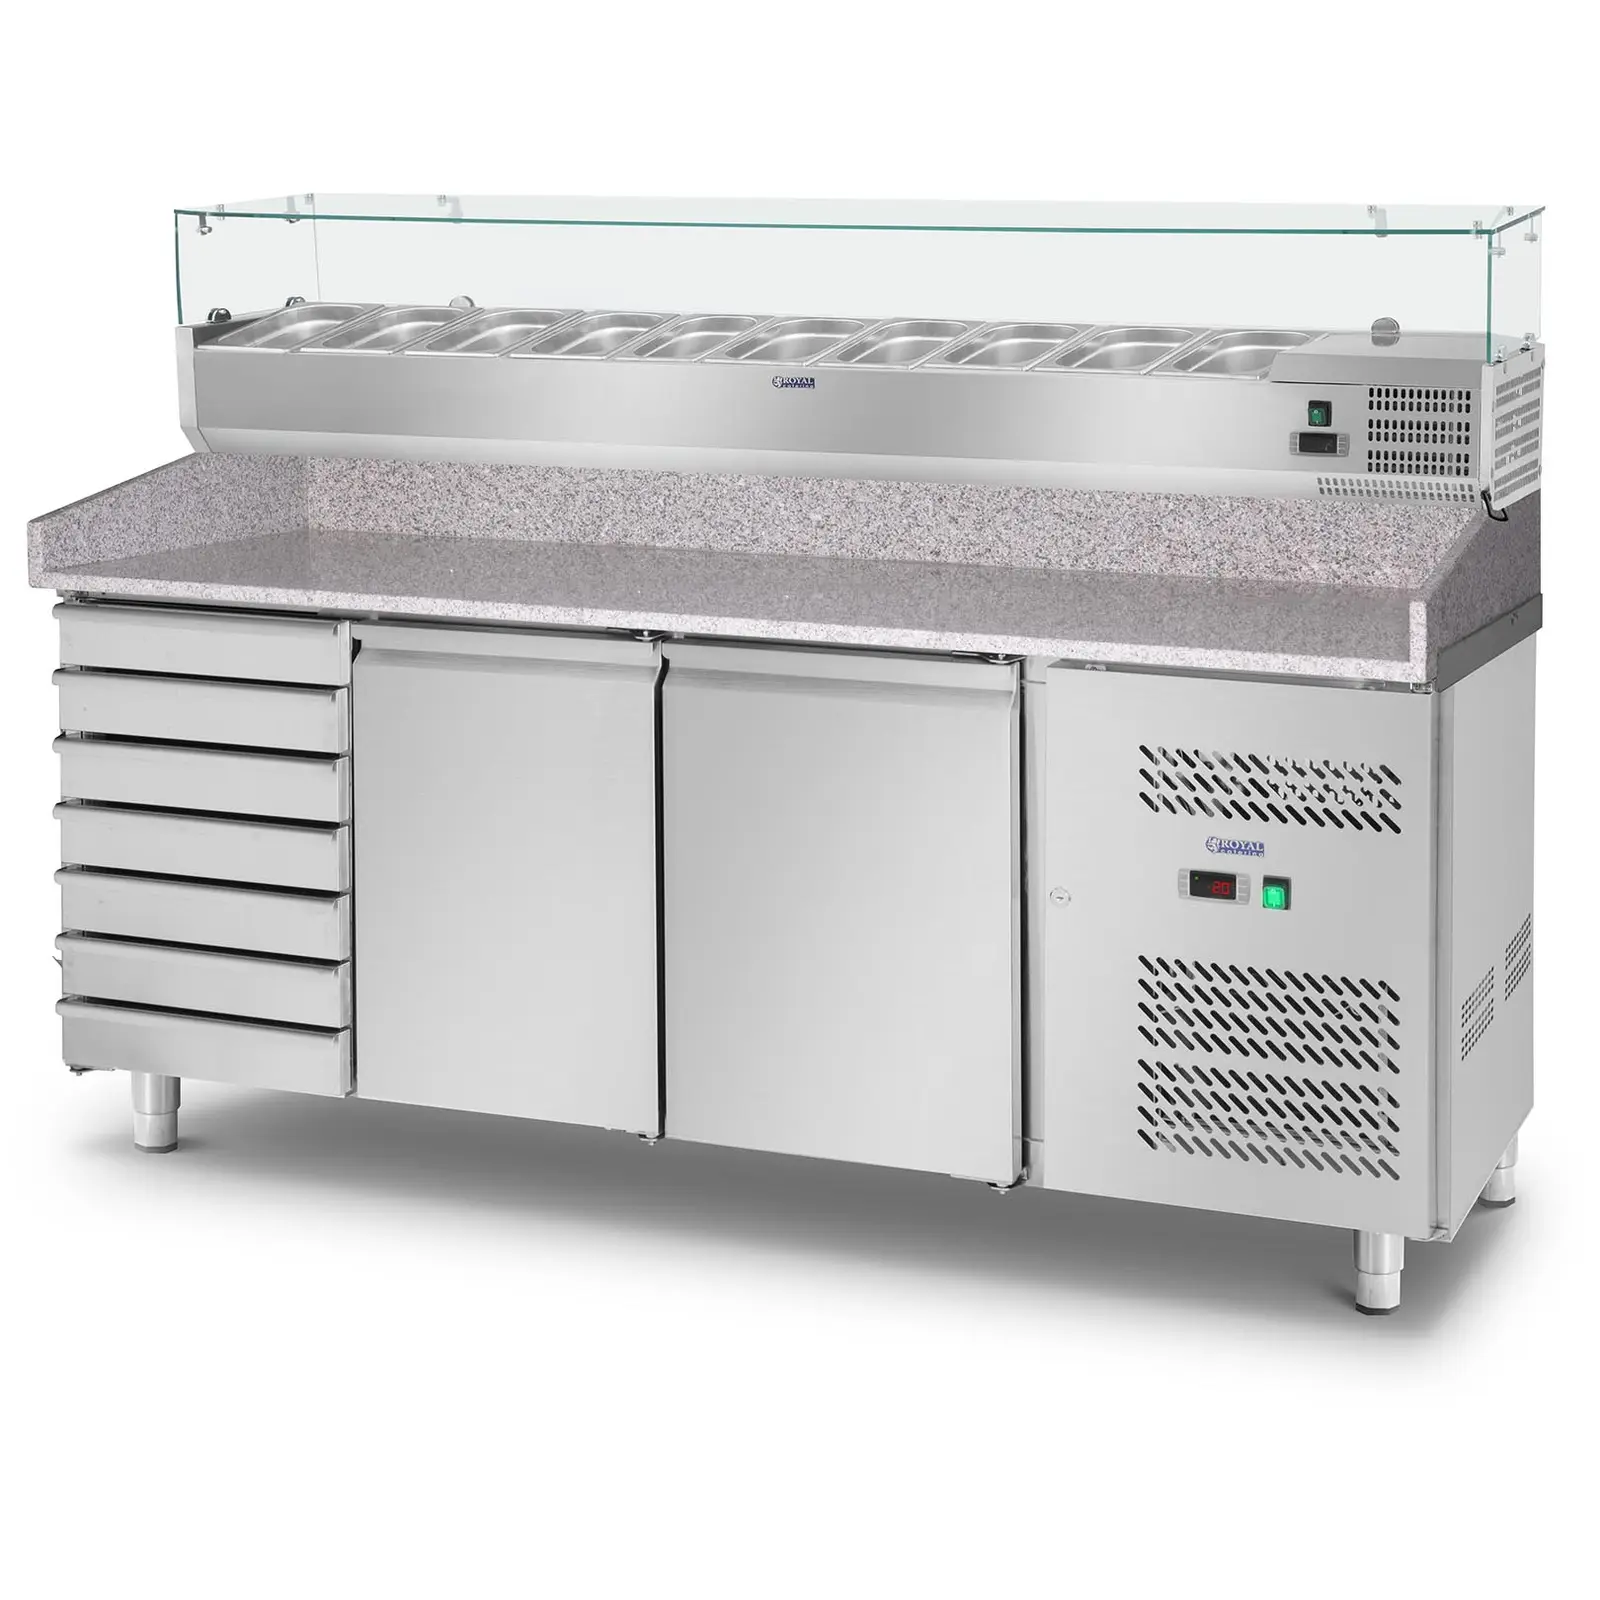 Cooling Table - Cooling Attachment - 702 L - Granite Counter - 2 Doors